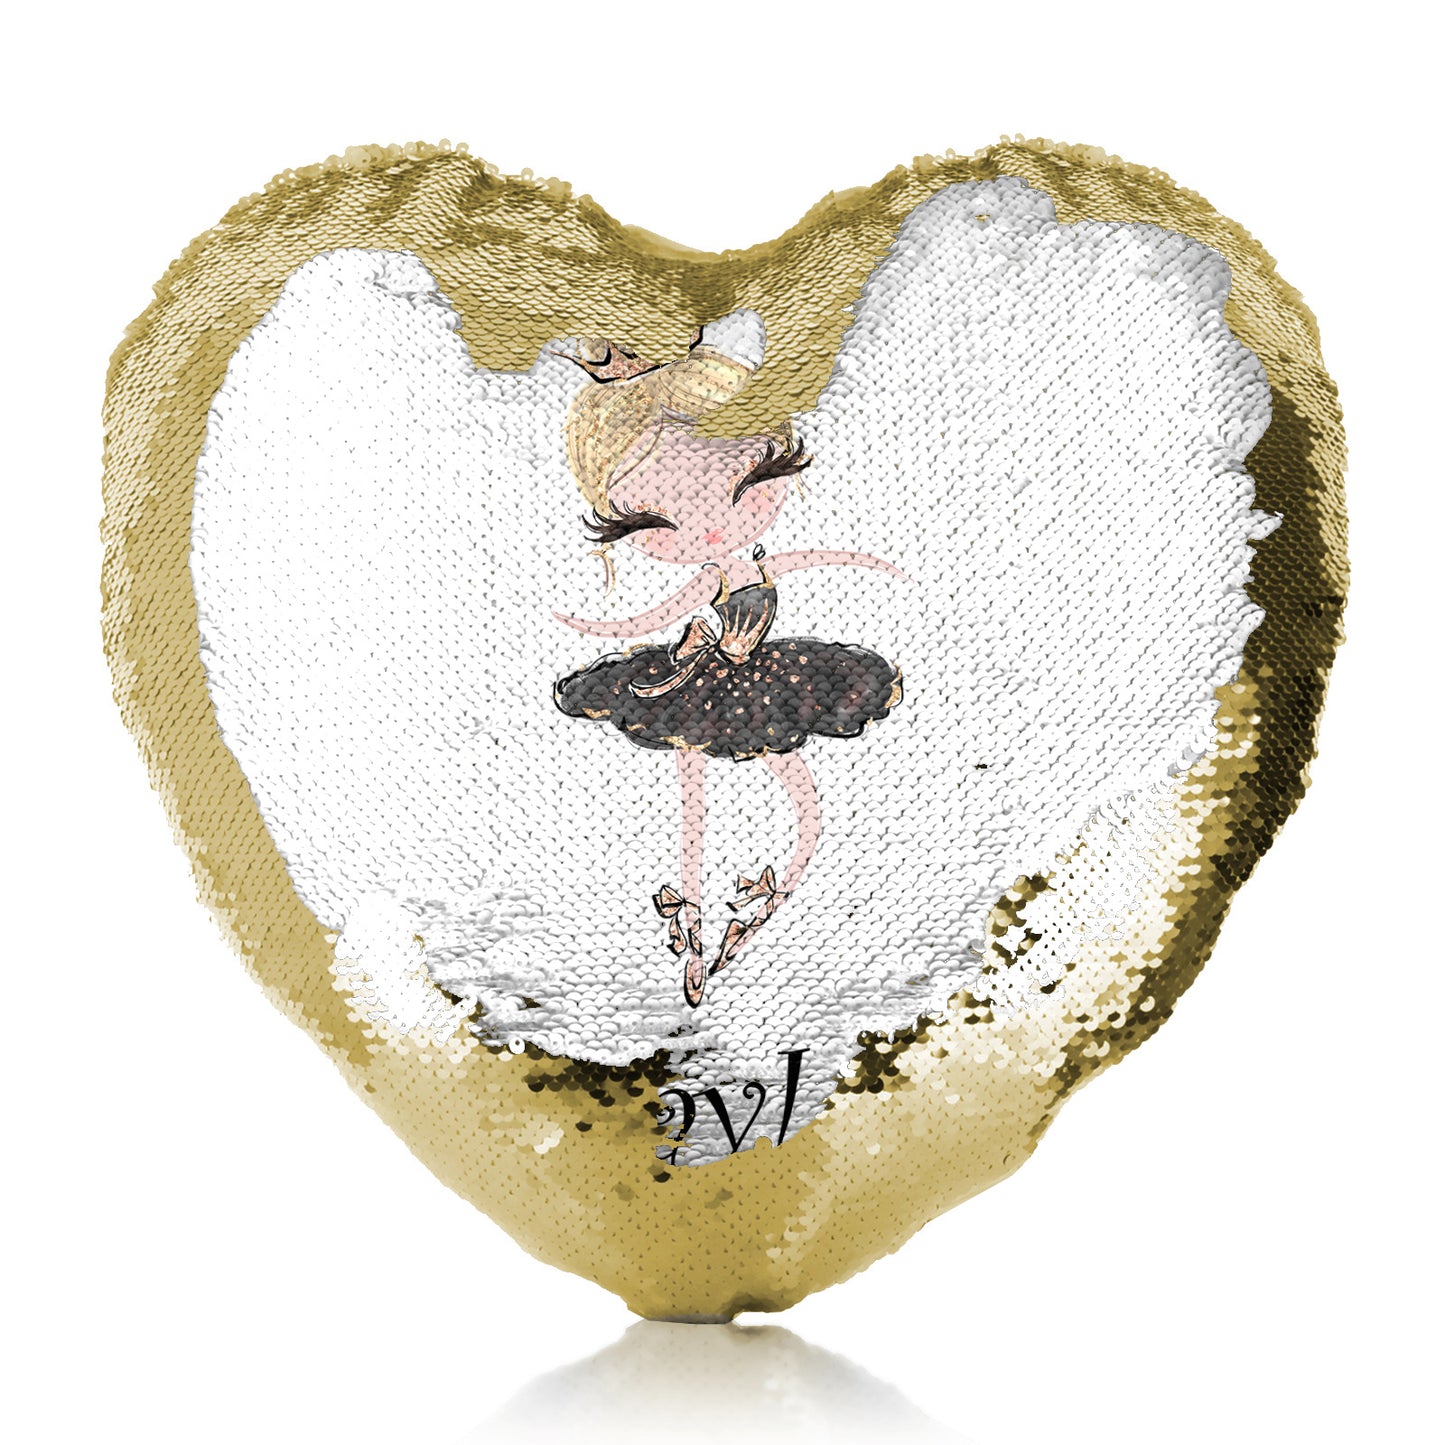 Personalised Sequin Heart Cushion with Cute Text and Blonde Hair Black Dress Tiara Ballerina